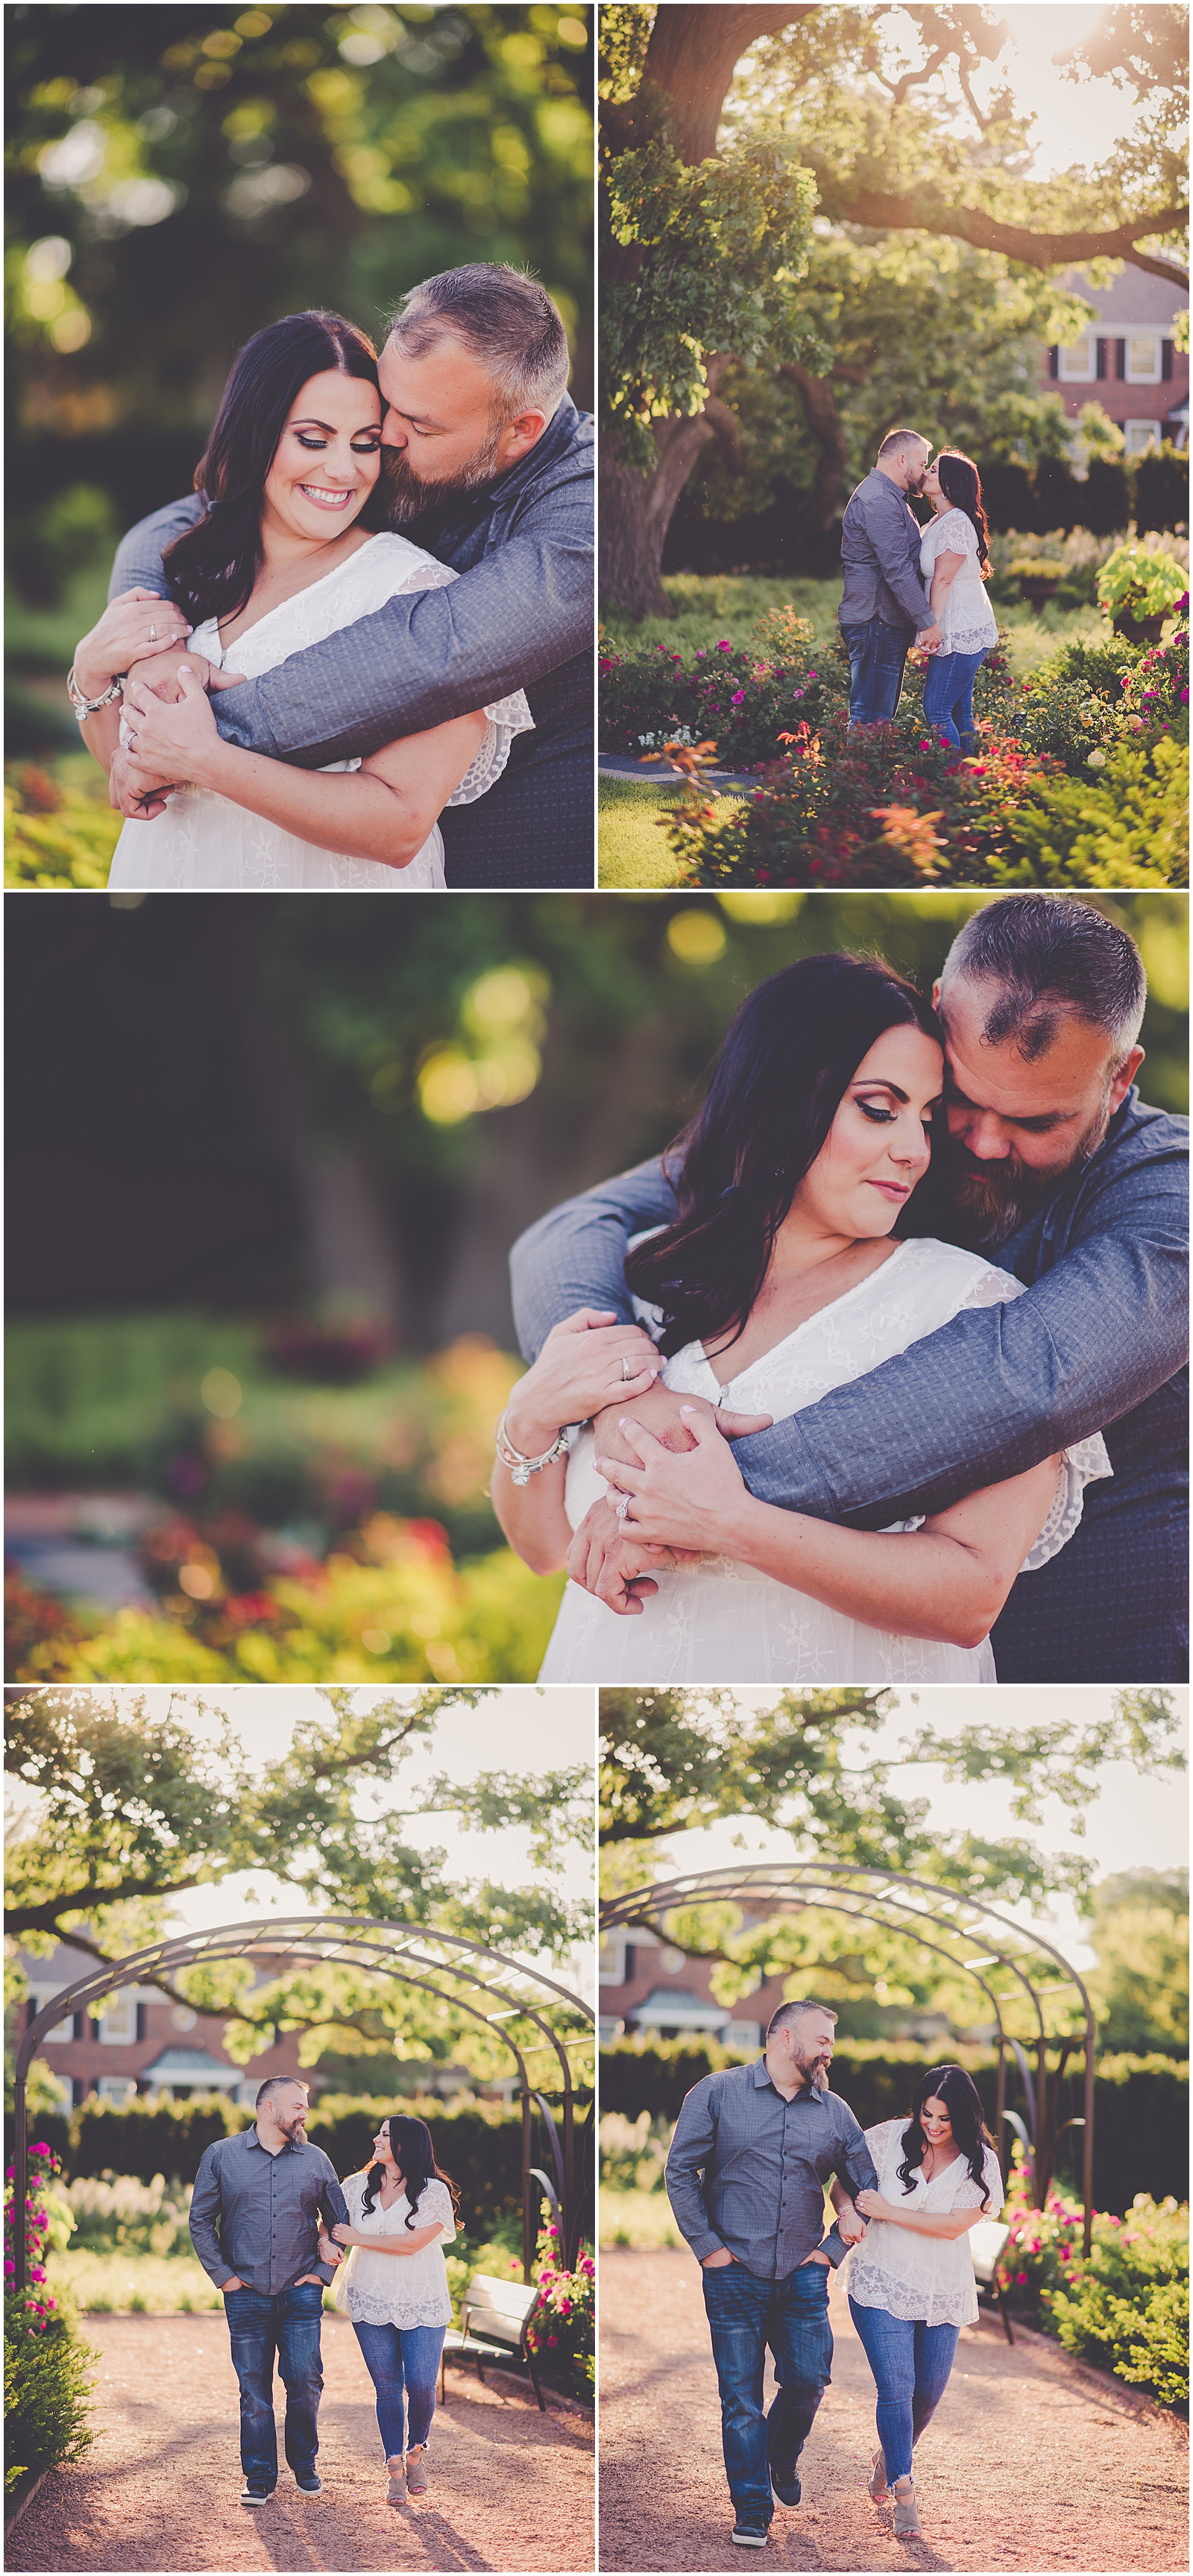 Antonia and John's summer sunset engagement at Cantigny Park in Wheaton, Illinois with Chicagoland wedding photographer Kara Evans Photographer.